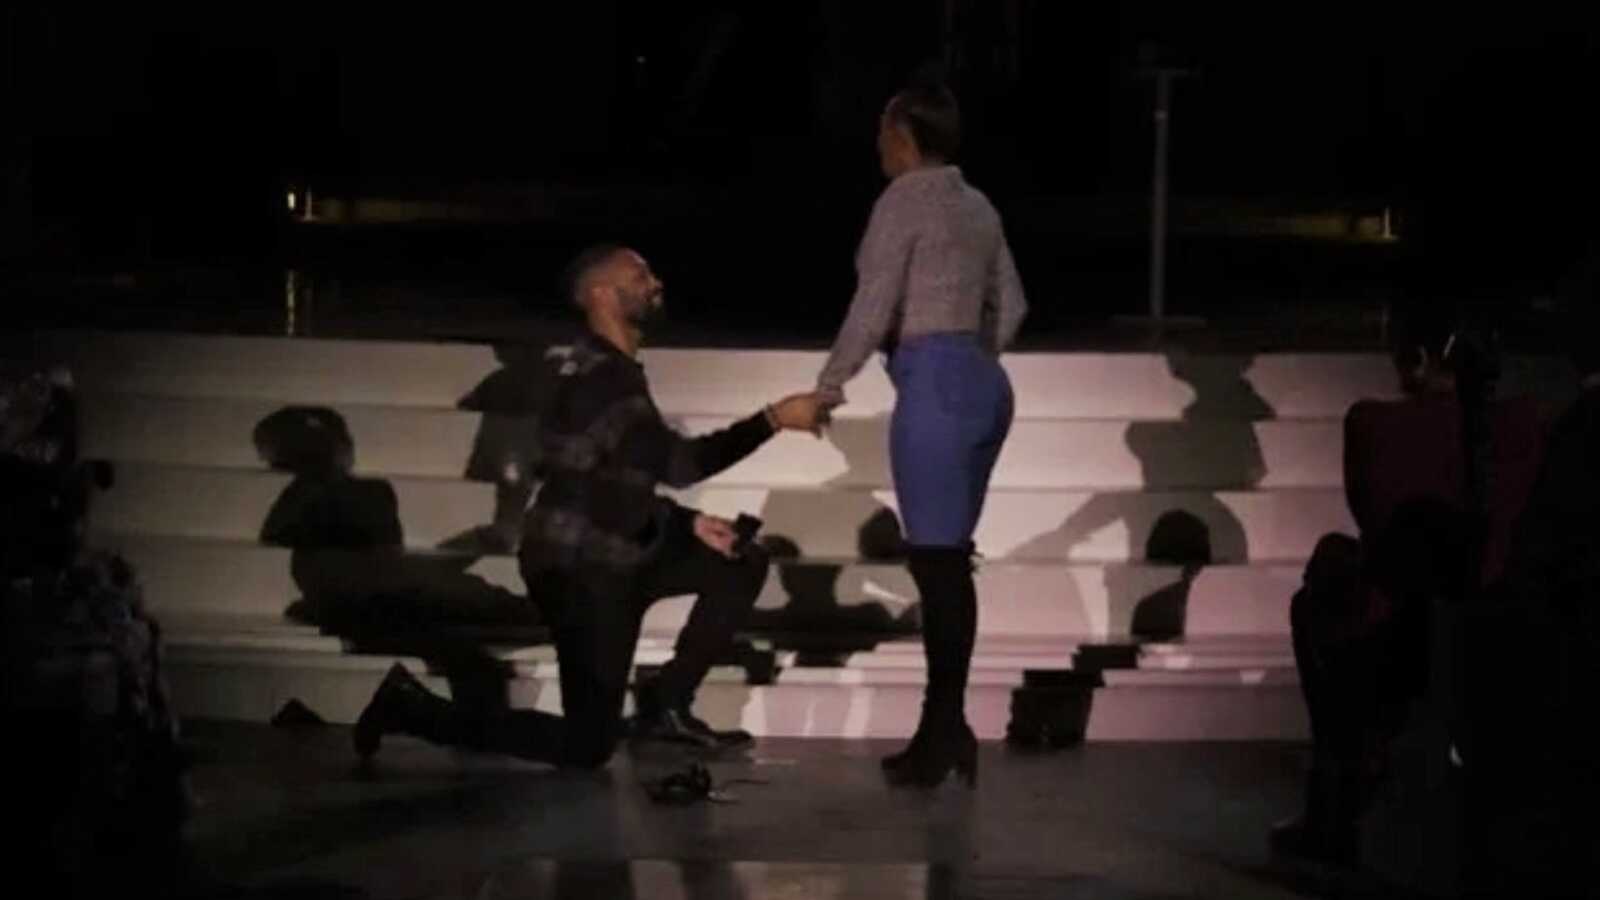 man proposing to his girlfriend at an Adele concert